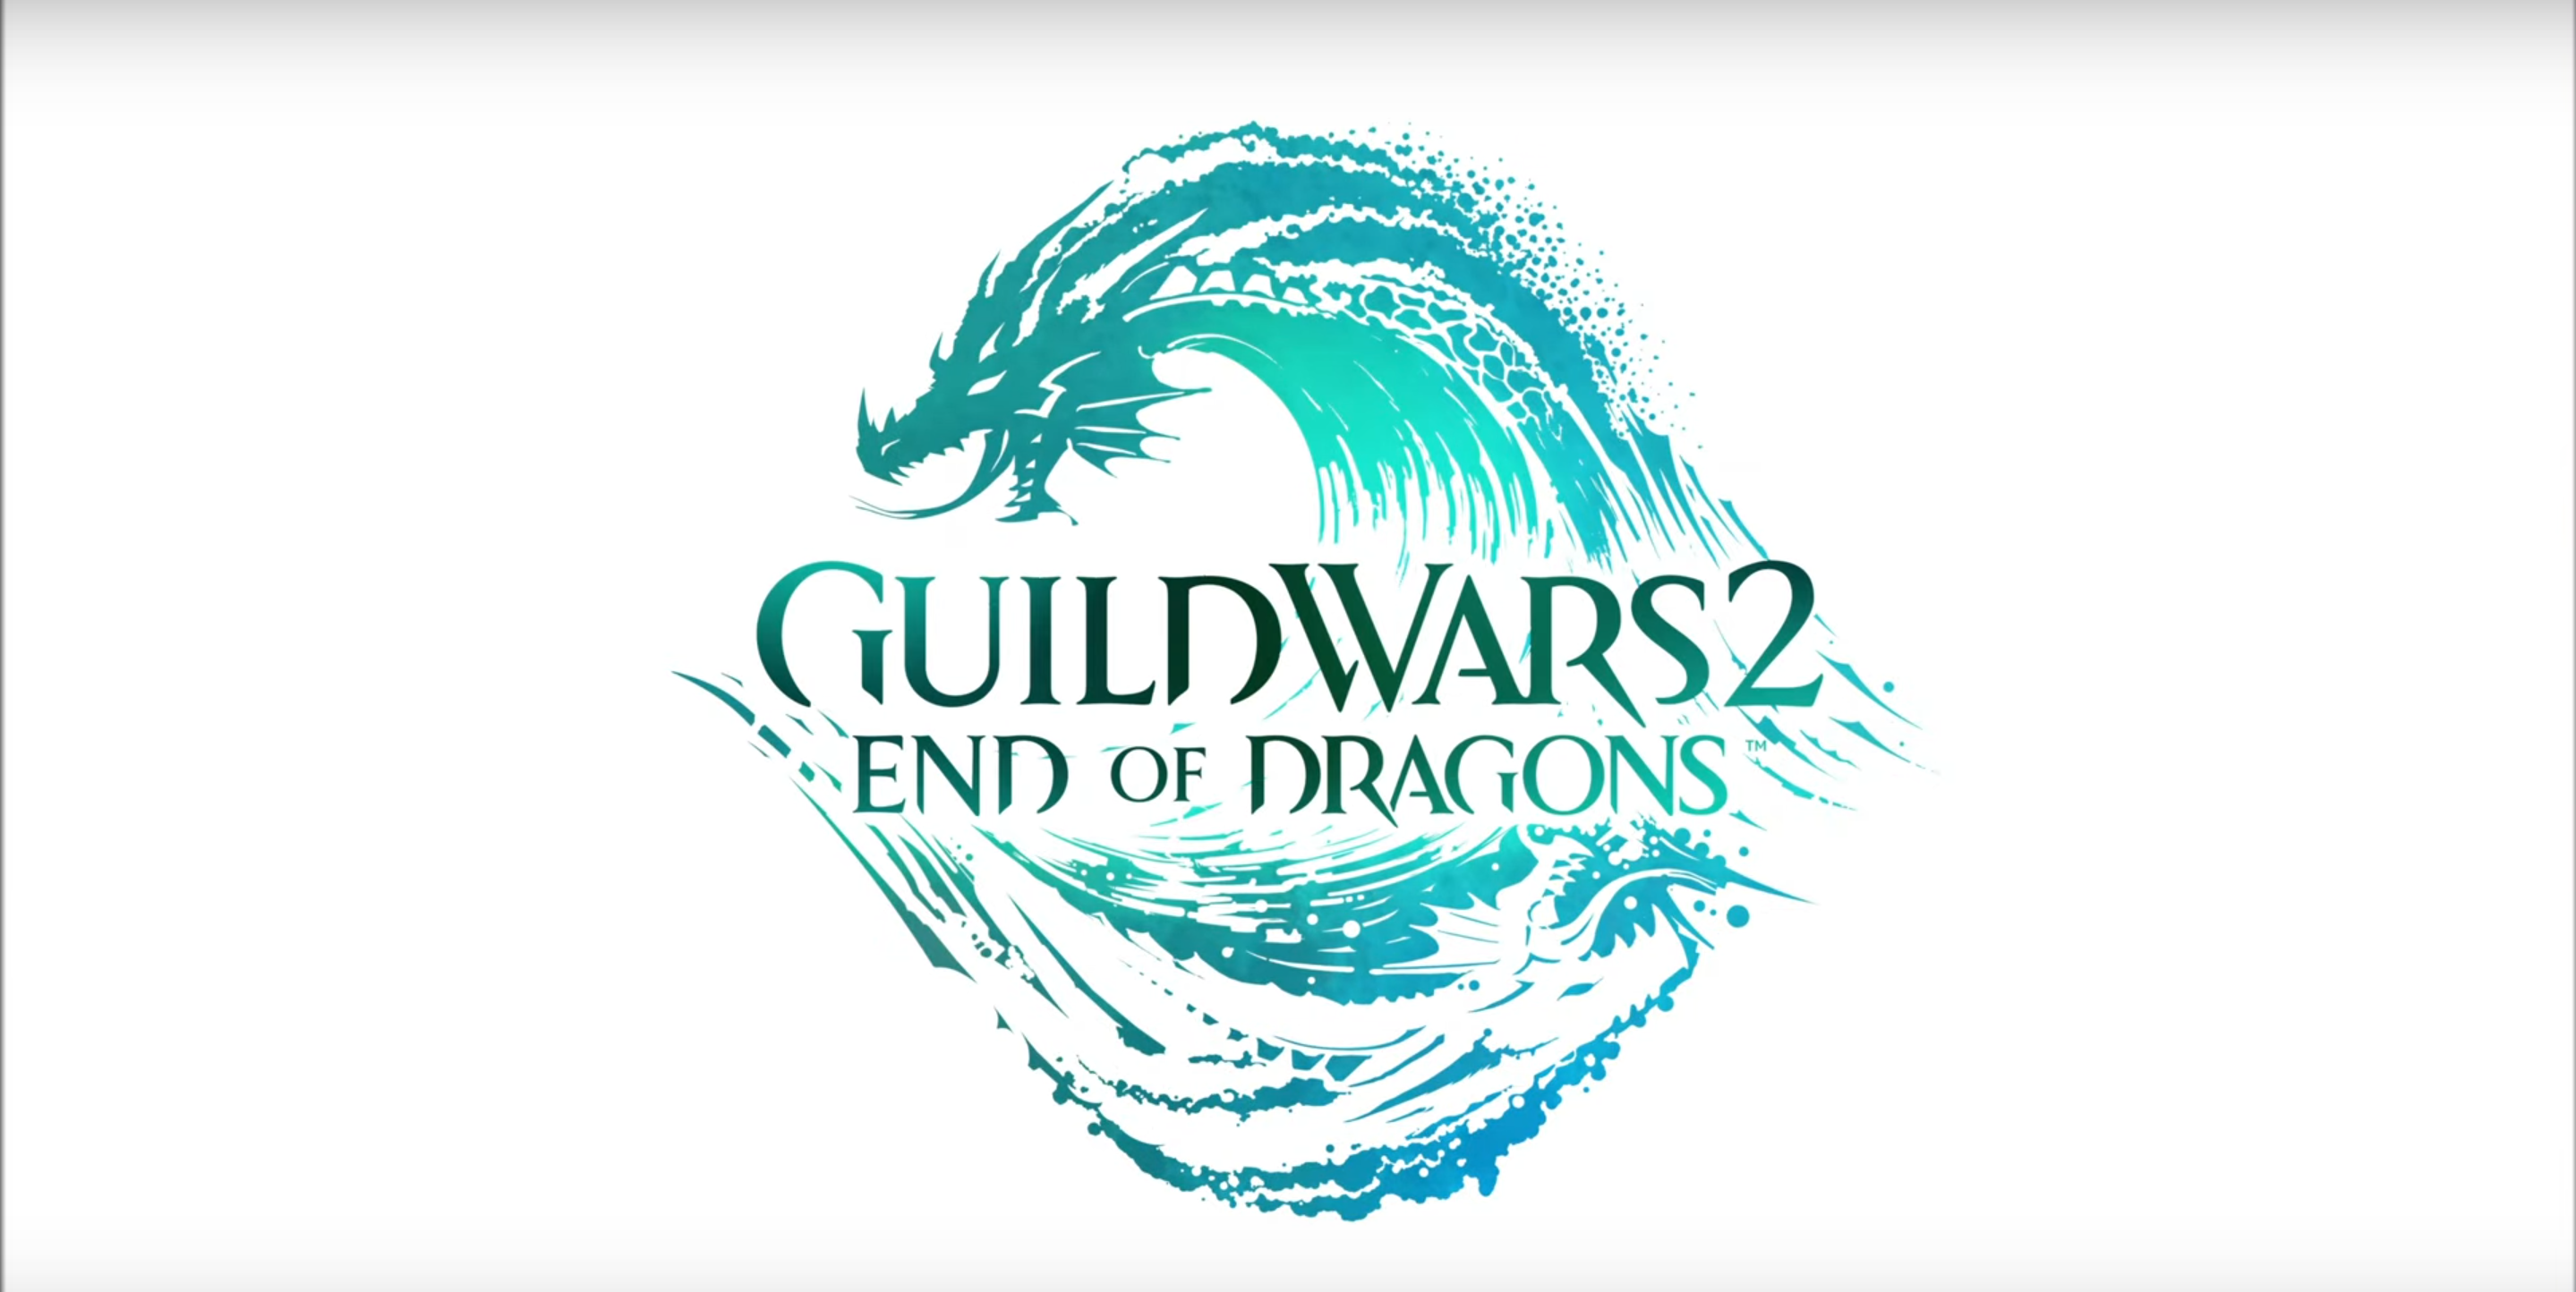  When is Guild Wars 2: End of Dragons coming out? 